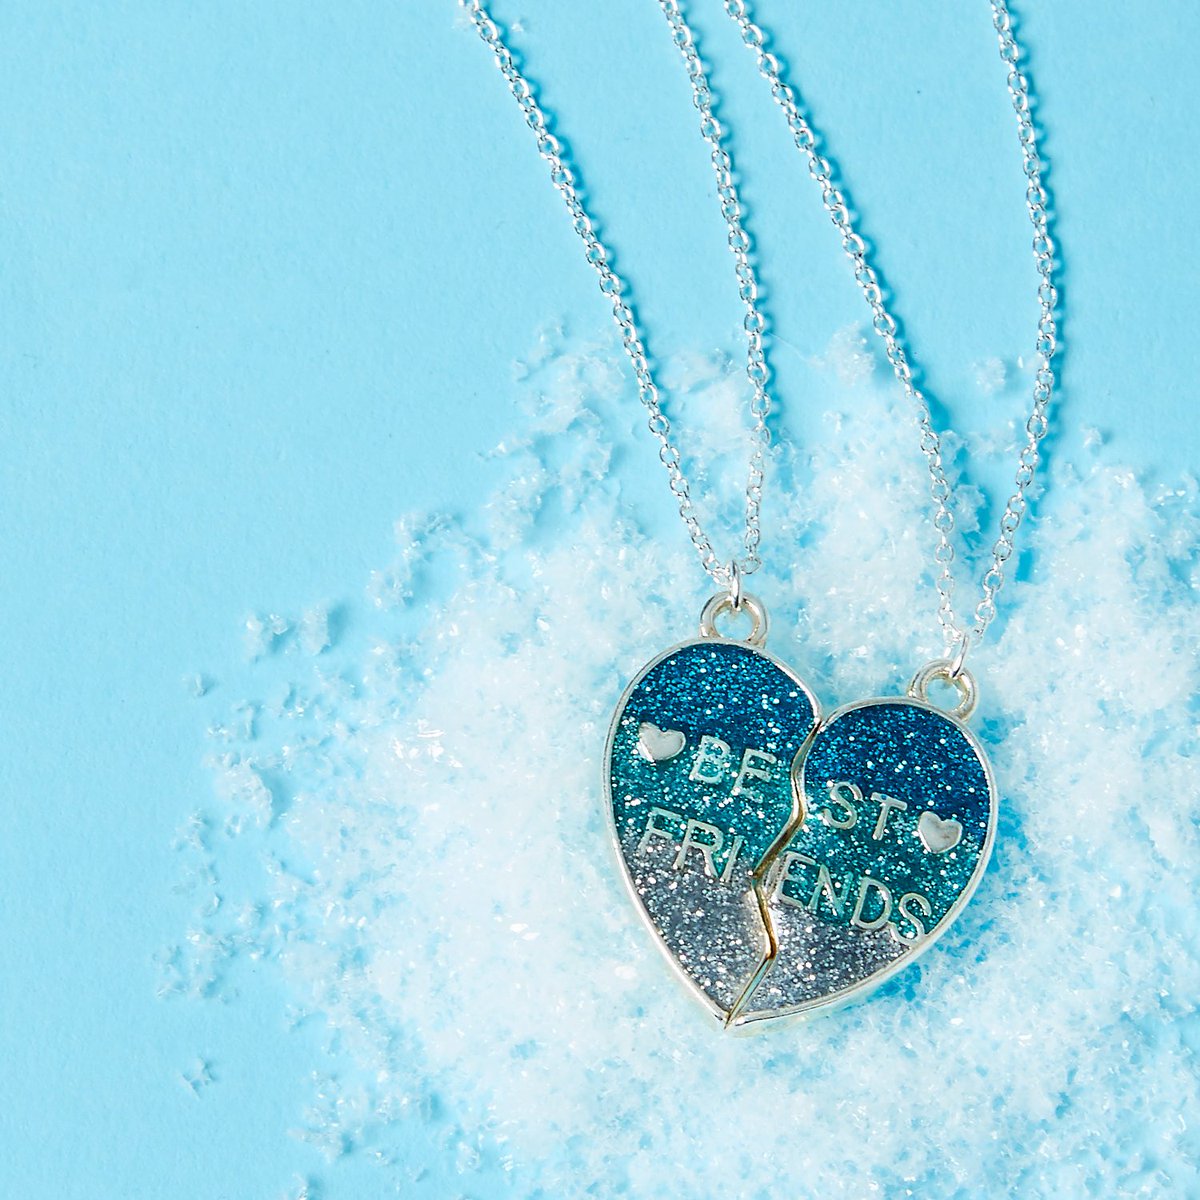 Claire's on Twitter: "Share this best friends necklace with your bestie 💙💎❄ Tag a friend who love this below! https://t.co/x9yRwJV0DV https://t.co/nM3ISn2AhQ" / Twitter